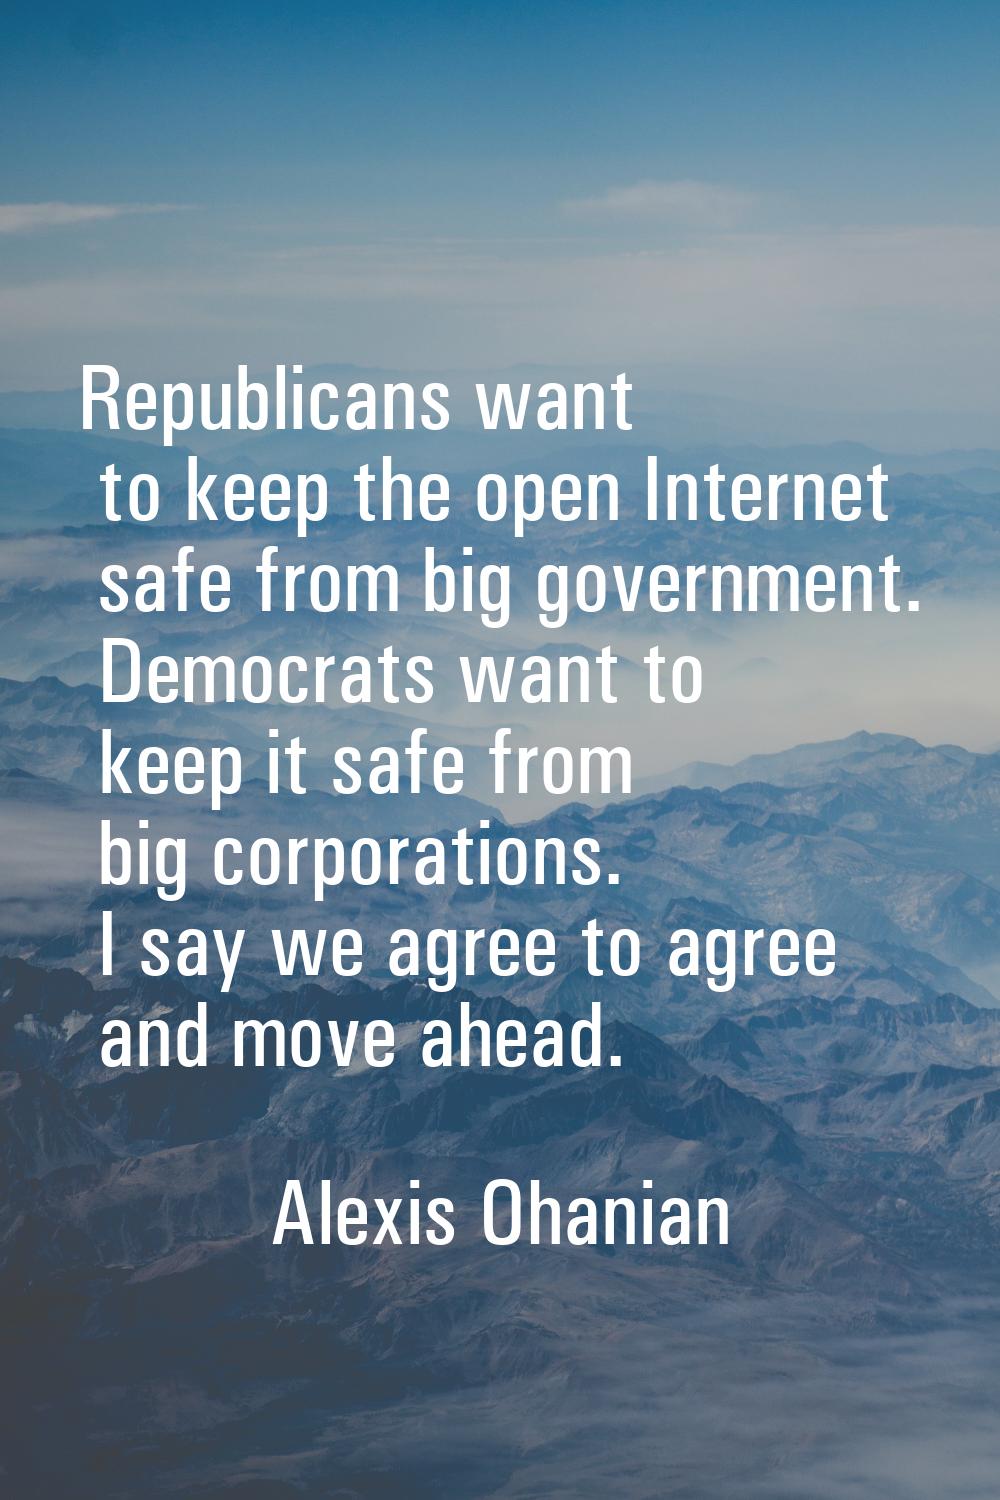 Republicans want to keep the open Internet safe from big government. Democrats want to keep it safe